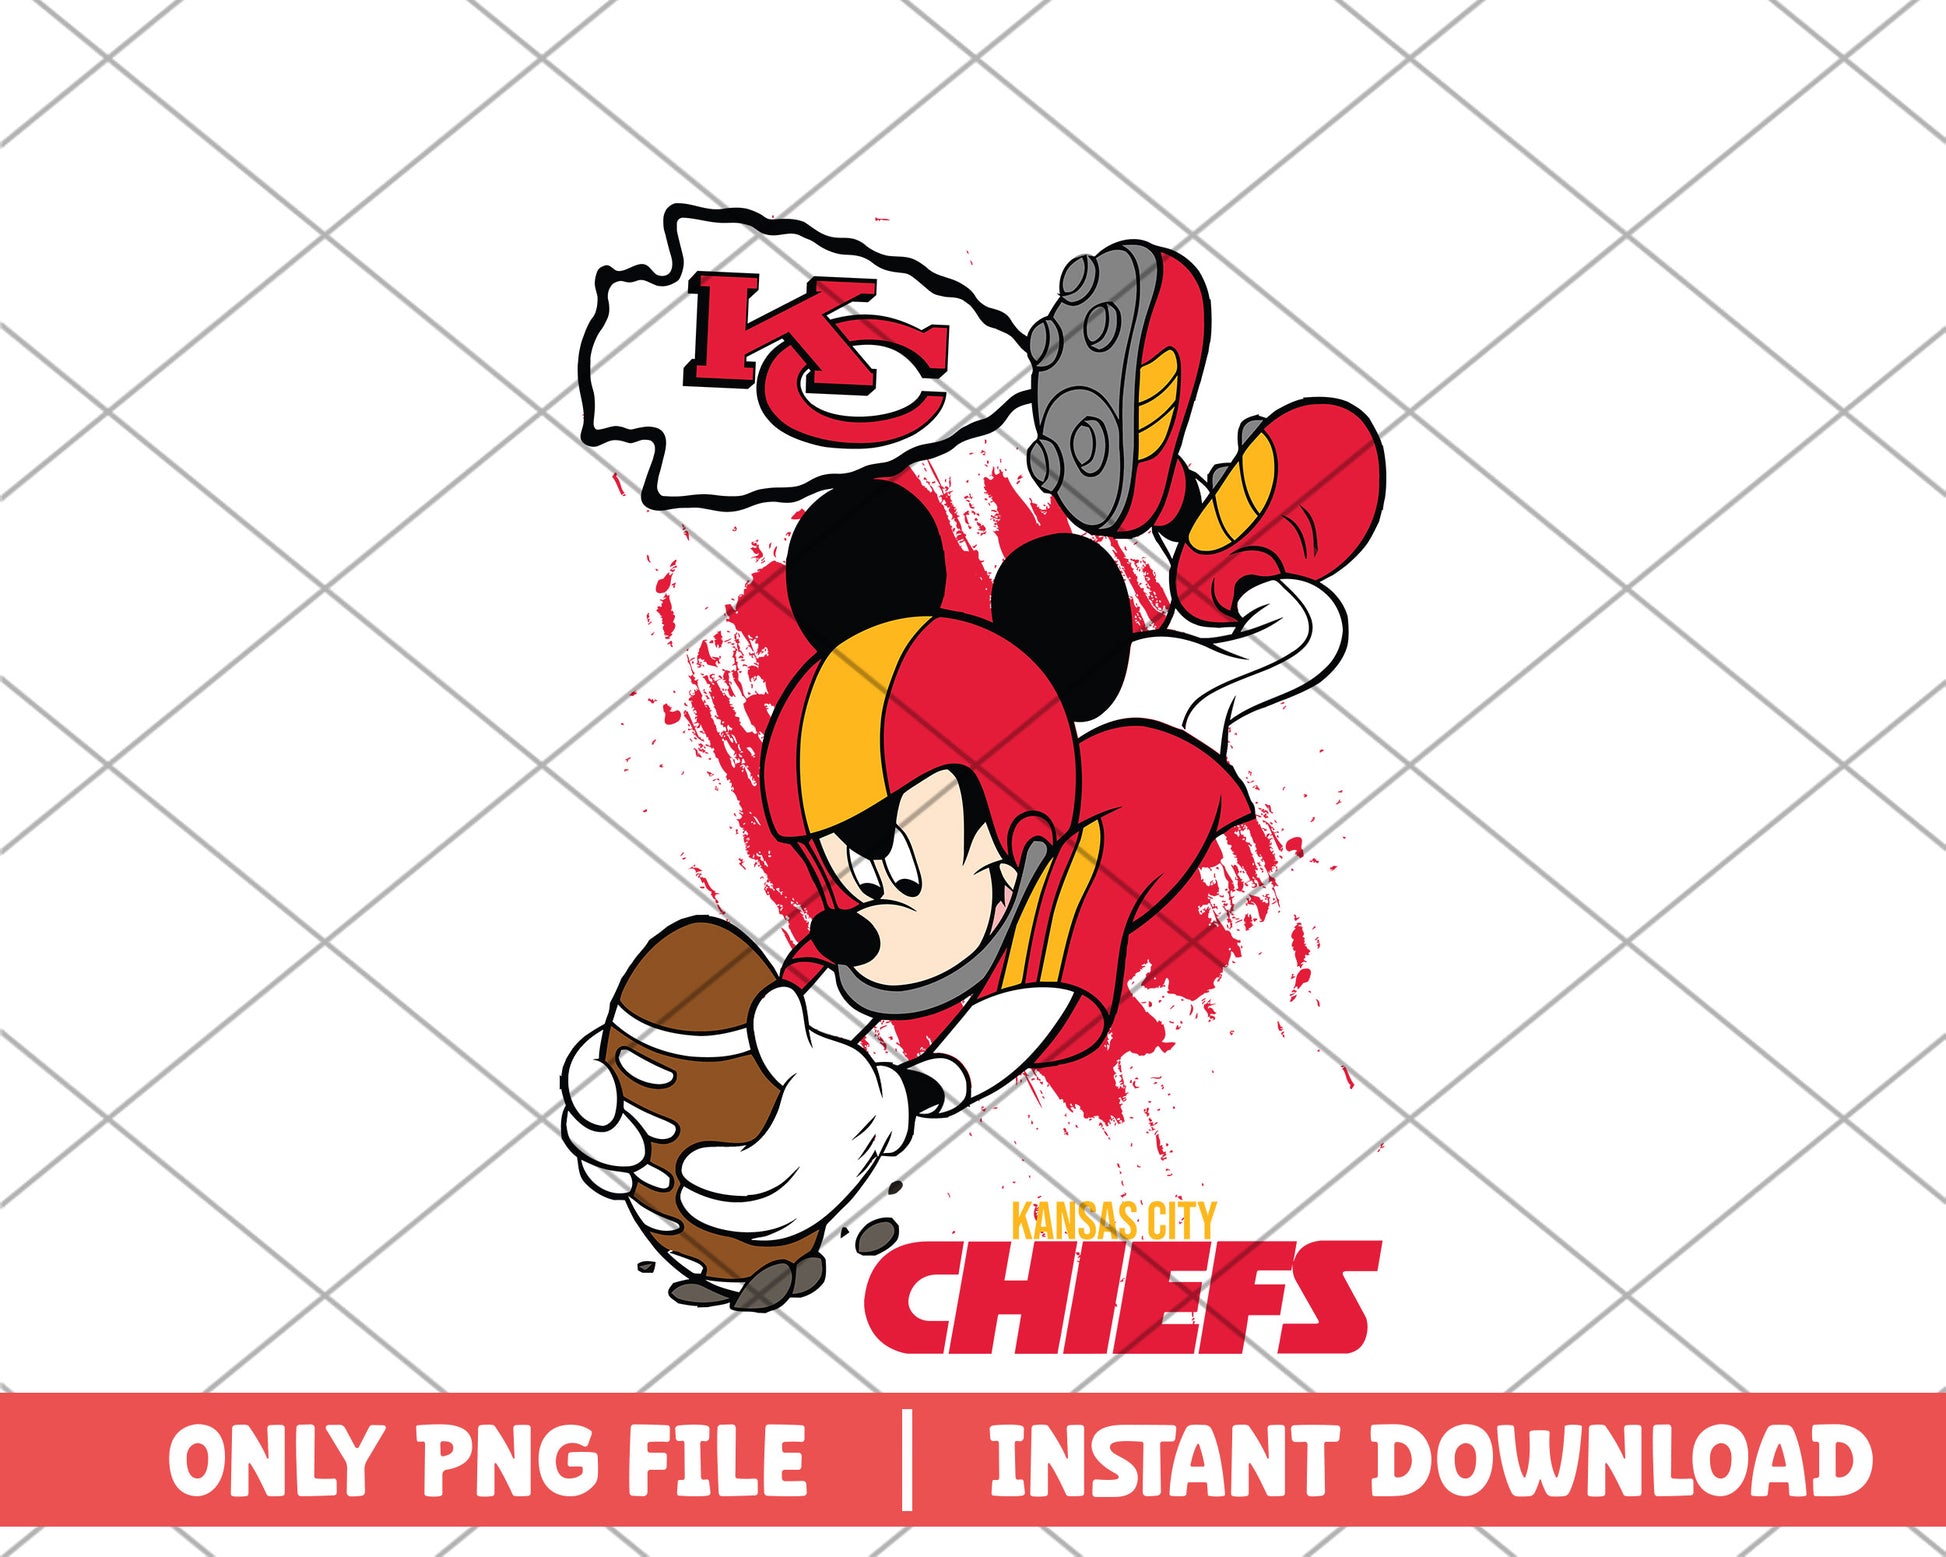 Kansa city chiefs mickey touch down png, kansas city chiefs png